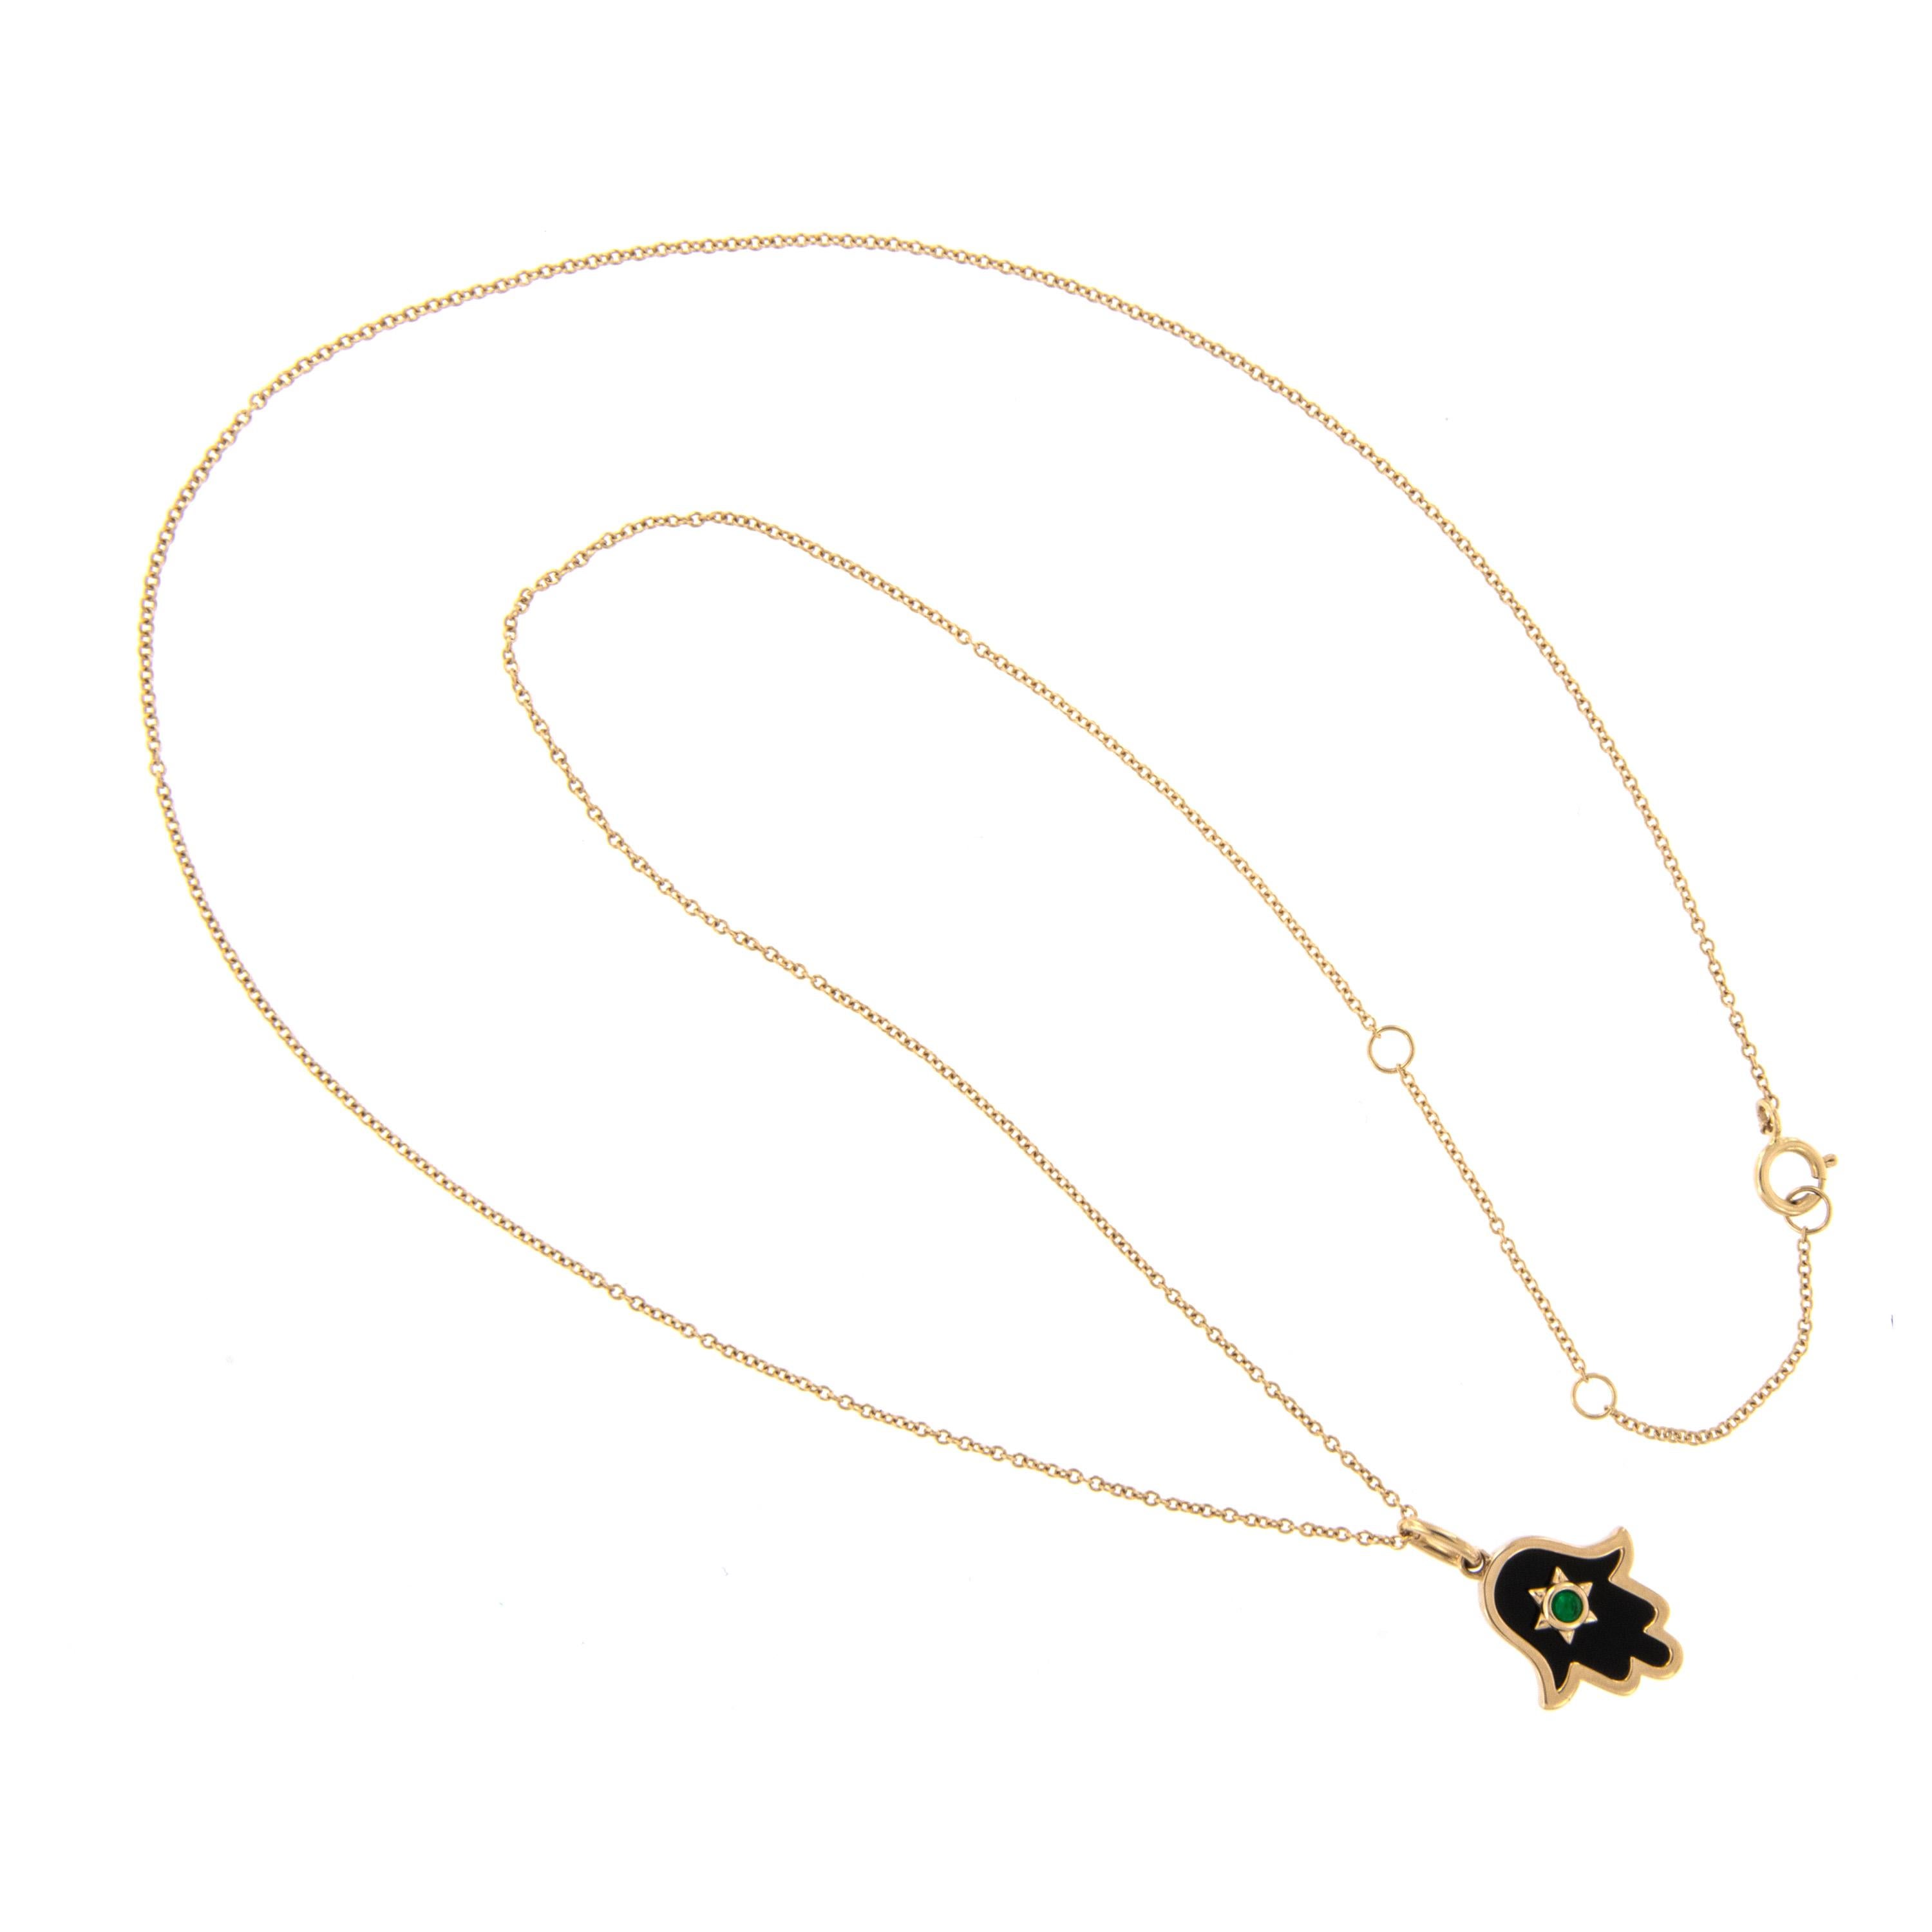 Made from rich 18 karat yellow gold with striking black onyx and emerald 